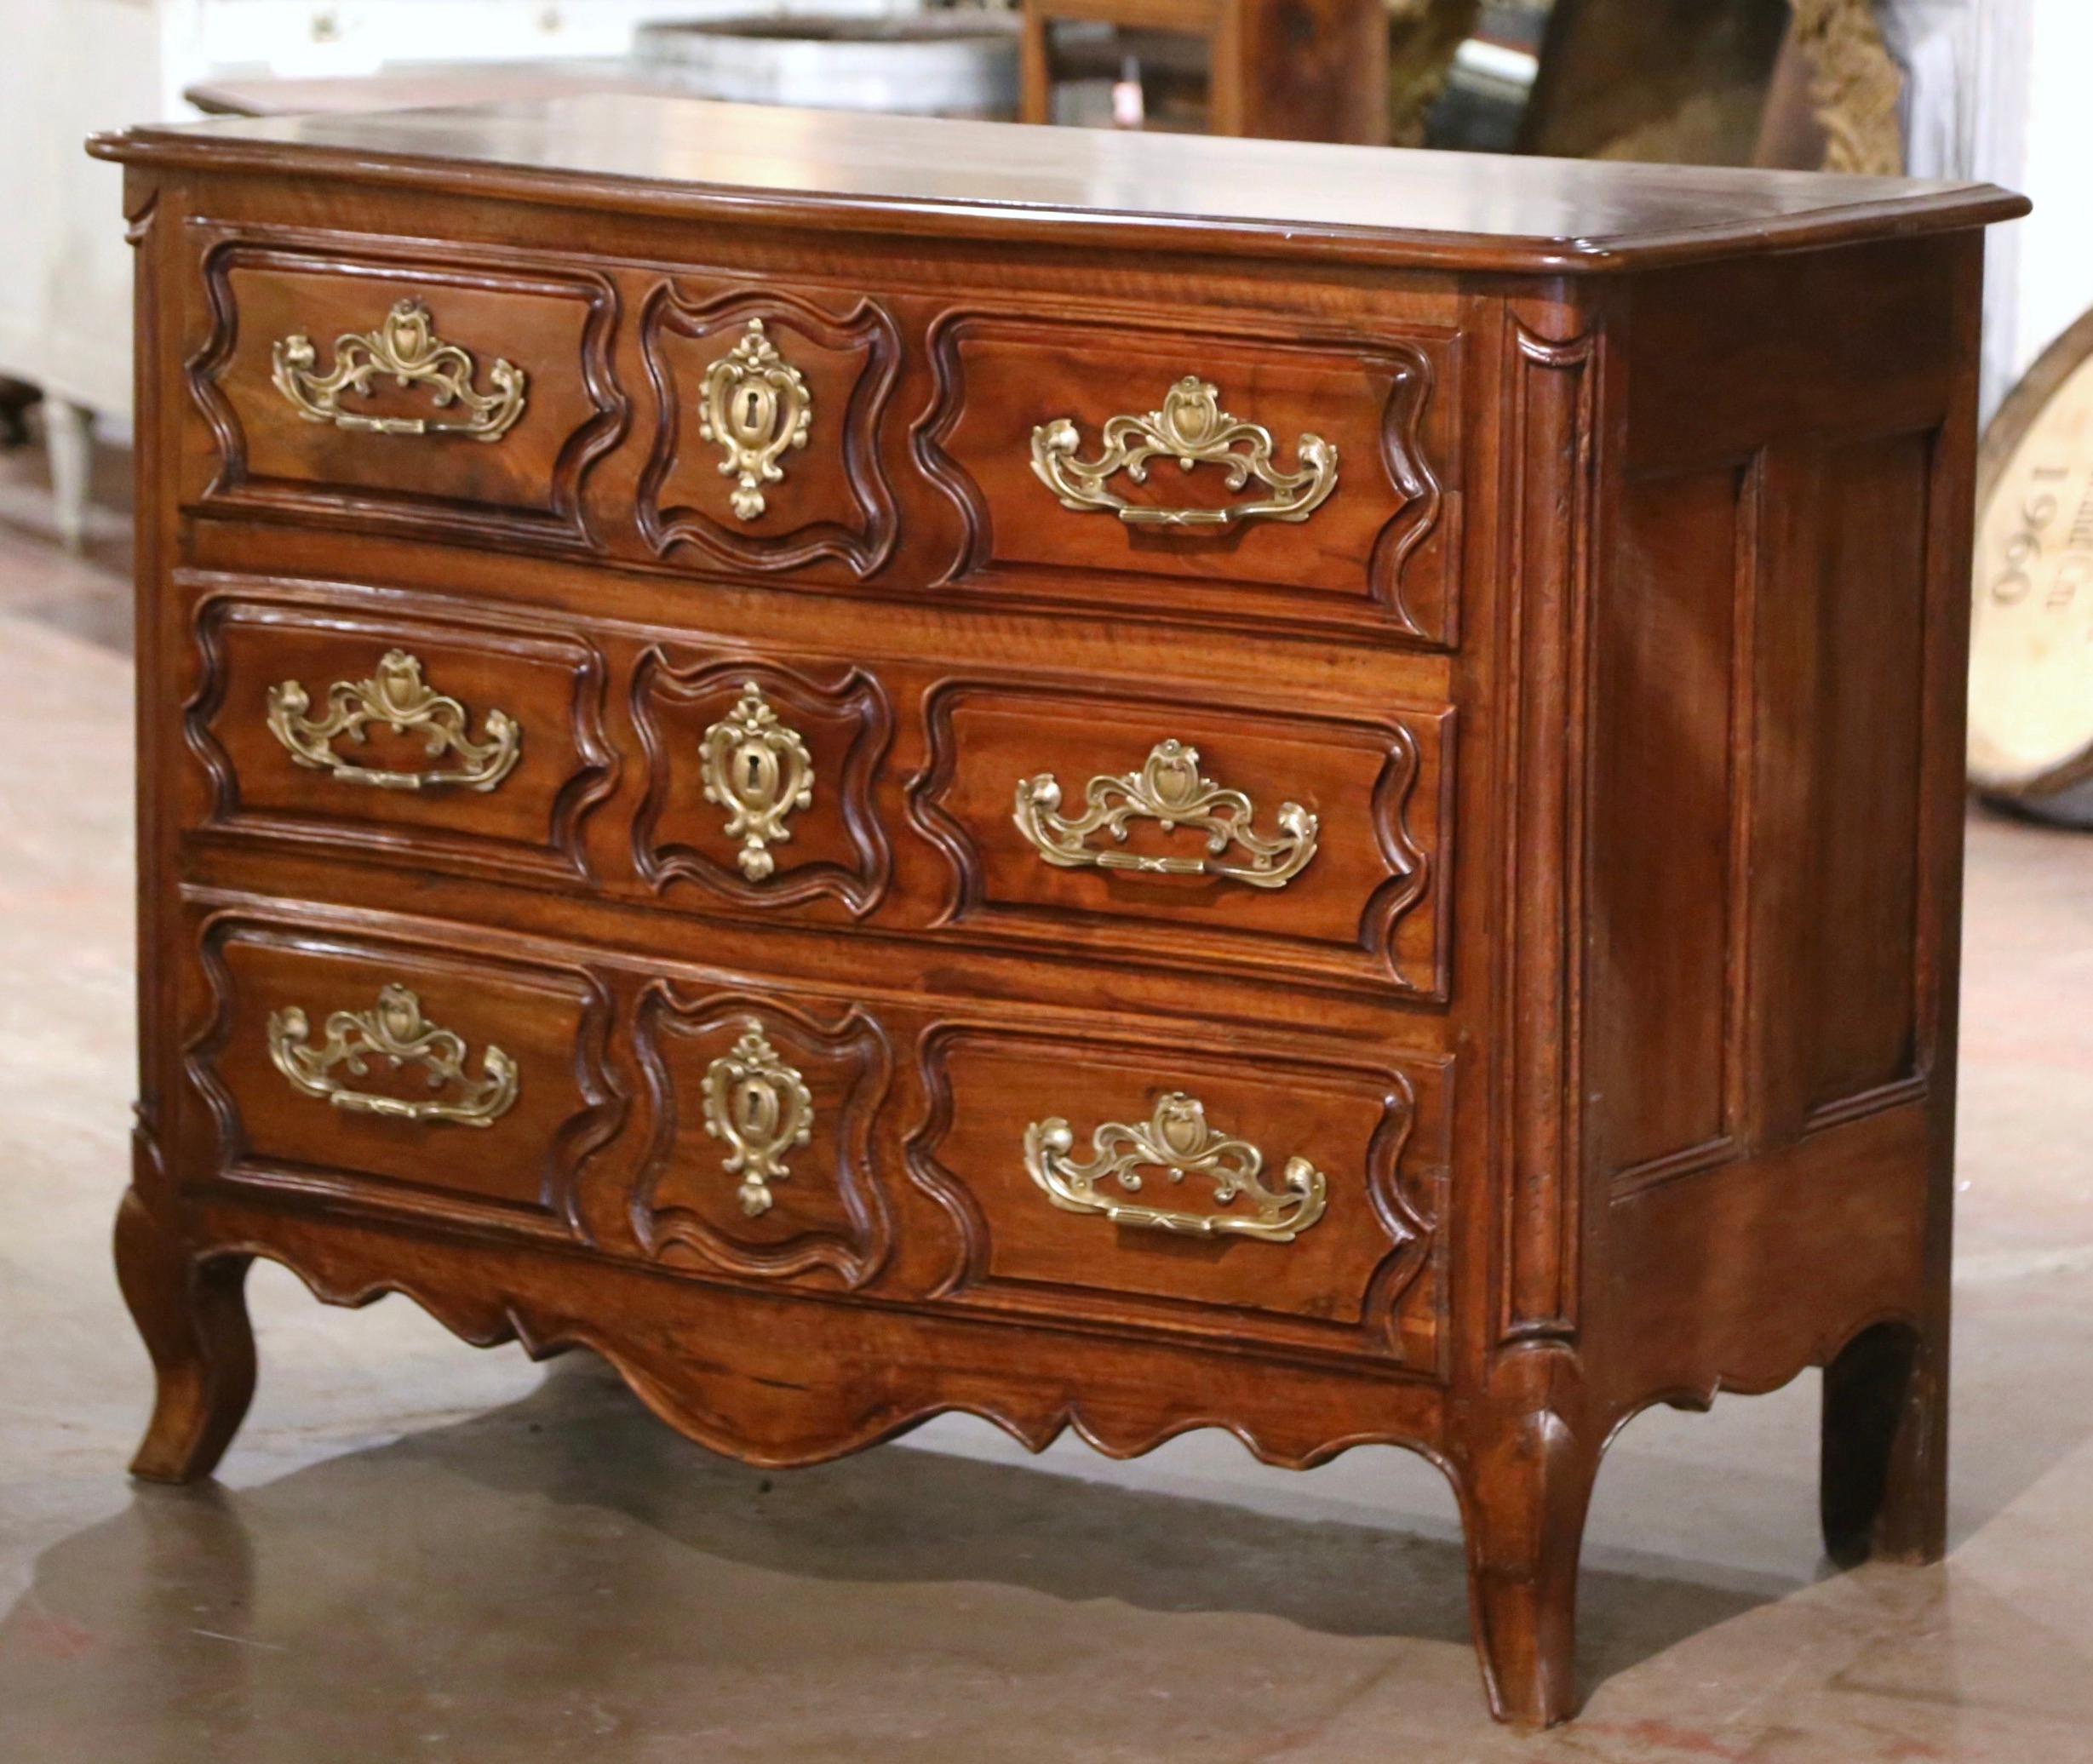 18th Century French Louis XV Carved Walnut Three-Drawer Commode Chest from Lyon For Sale 1